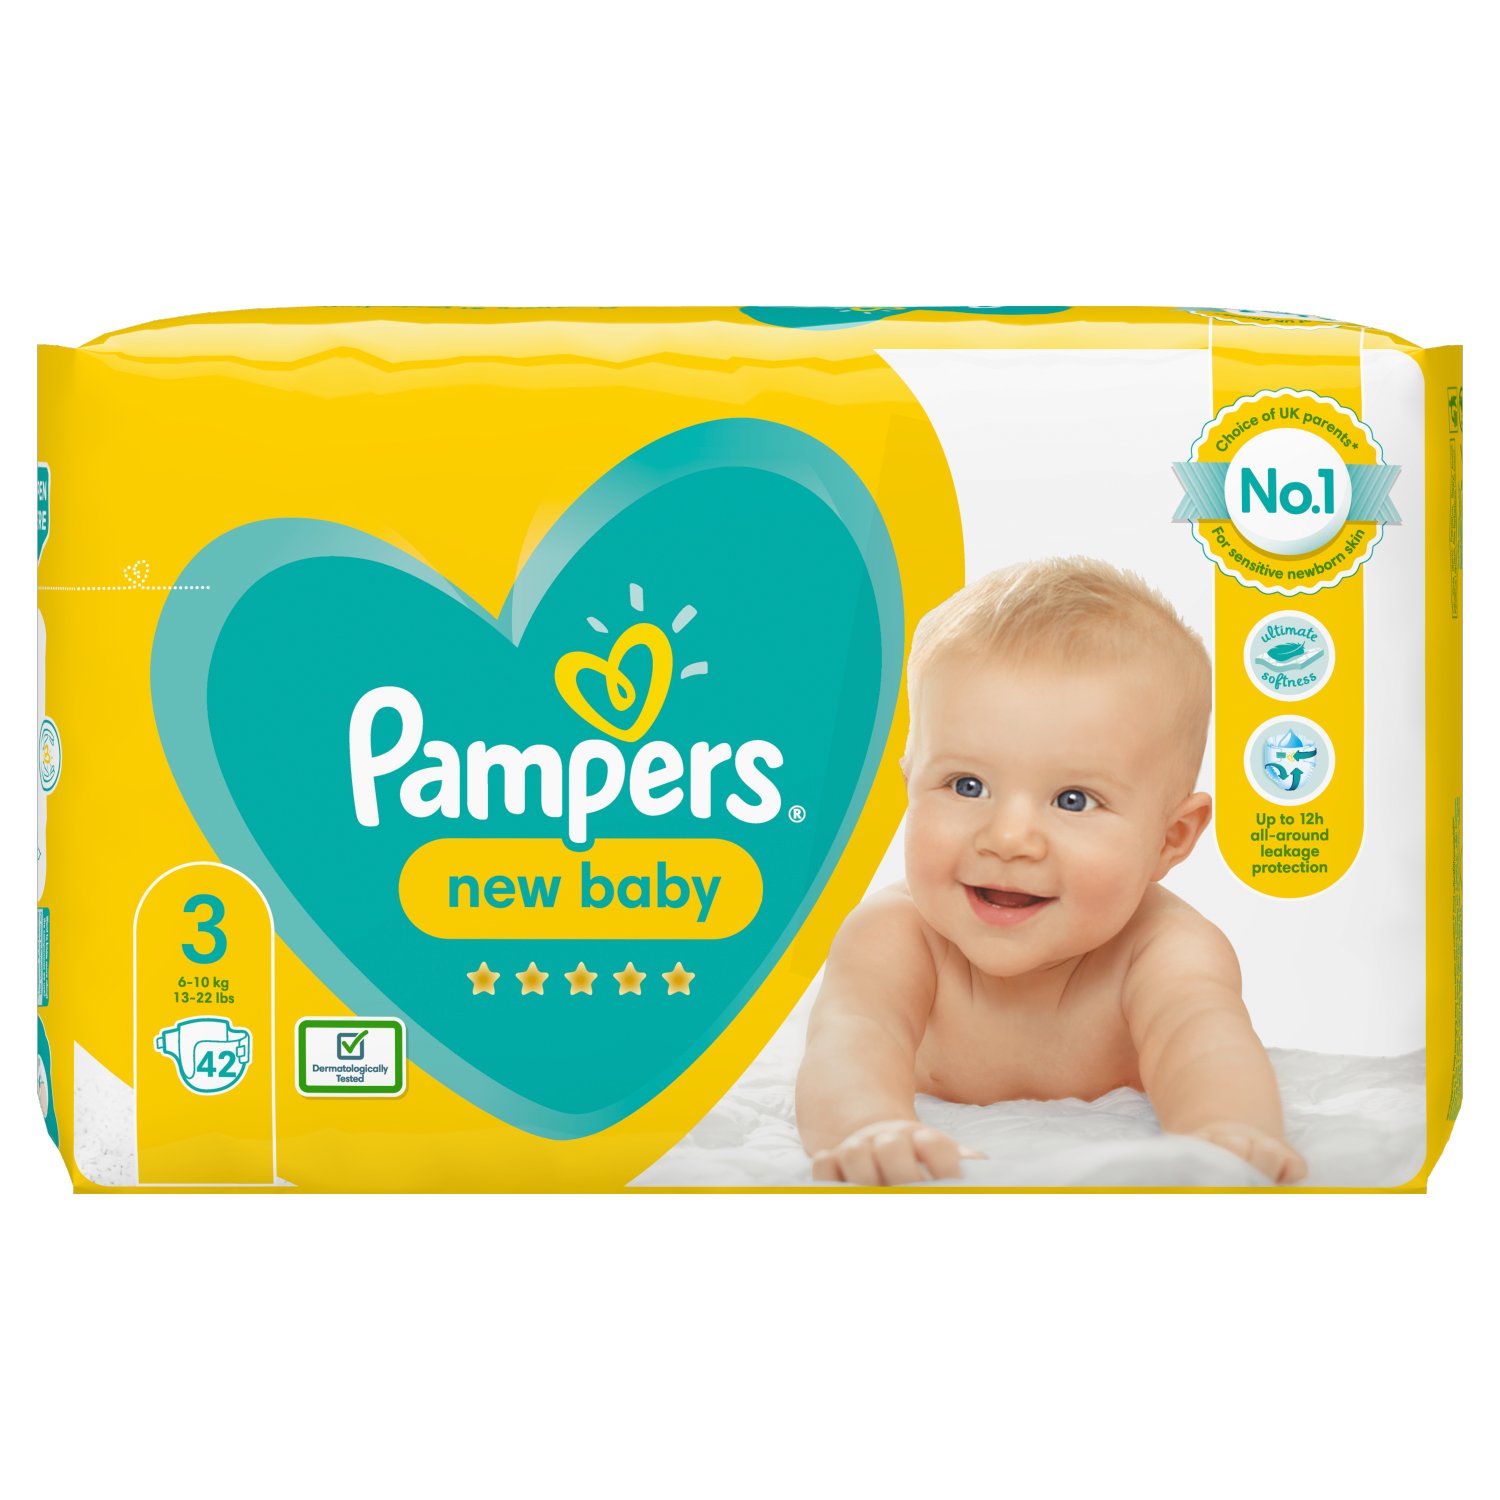 Pampers New Baby Size 3 Nappies (42 Piece)